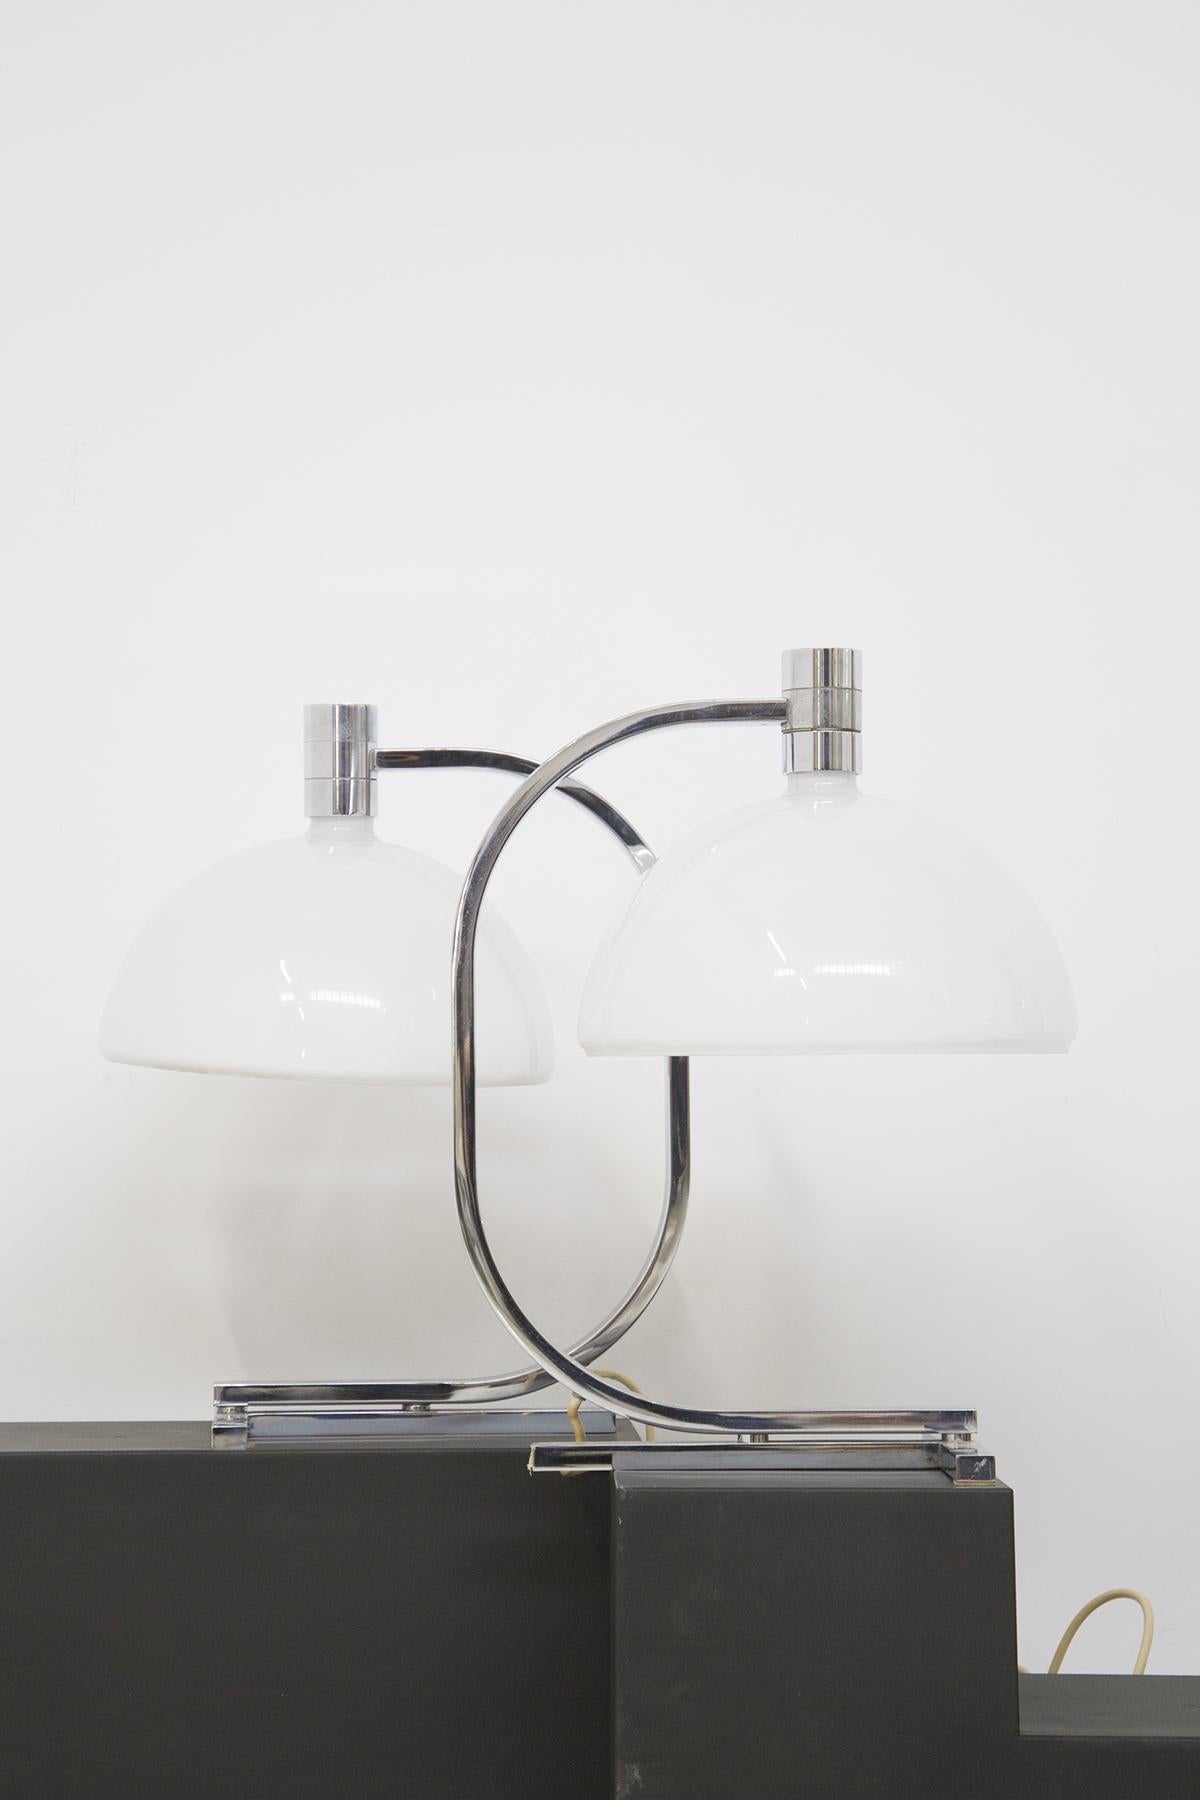 Beautiful glass table lamps made in the 1960s designed by Franco Albini and Franca Helg for Vips Residence, of fine Italian manufacture.
The lamps have a chromed metal frame, finely crafted and curved, in black color.
The hats are made of glass,